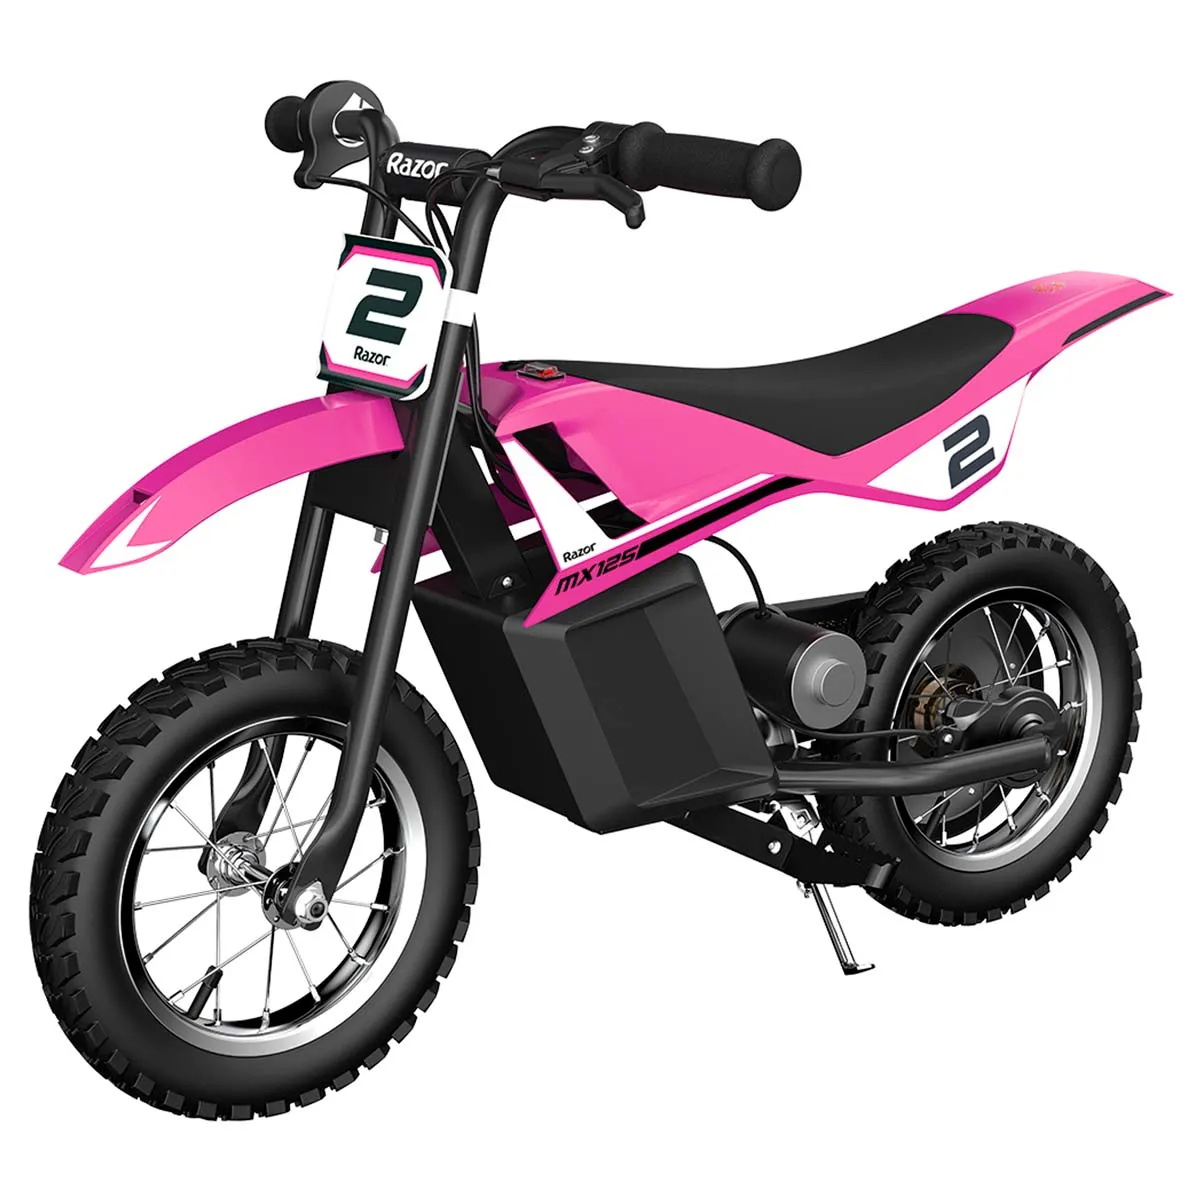 Best Electric Motorcycle for Teenagers